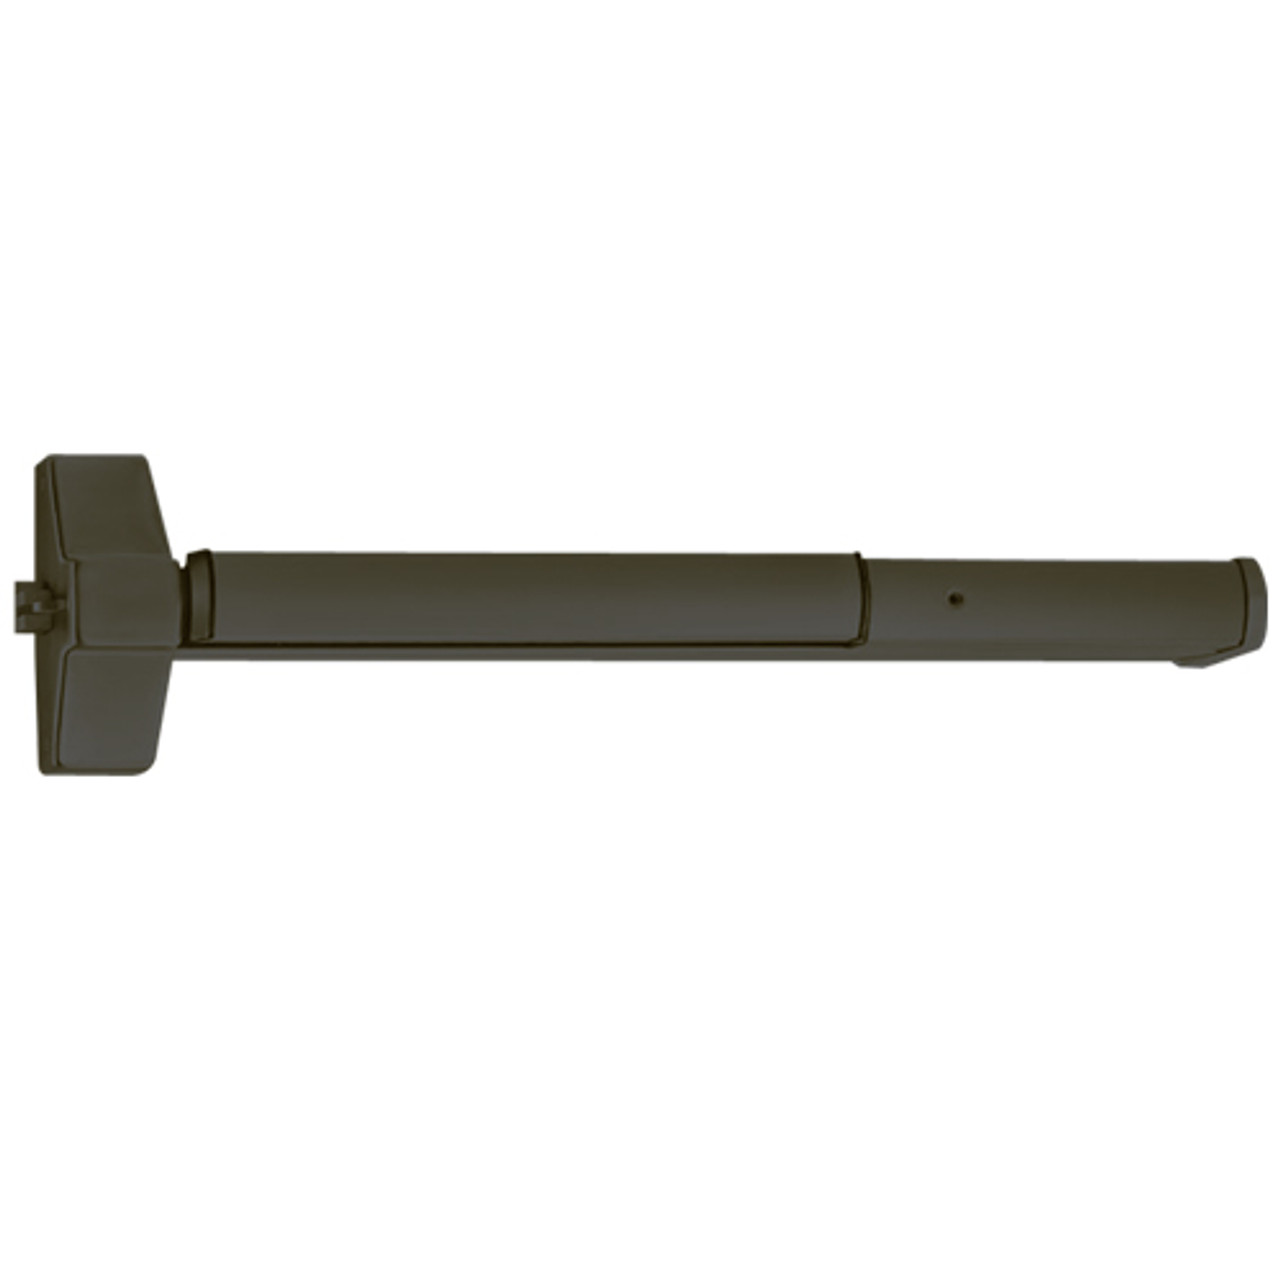 ED5200S-613-M52 Corbin ED5200 Series Non Fire Rated Exit Device with Cylinder Dogging in Oil Rubbed Bronze Finish